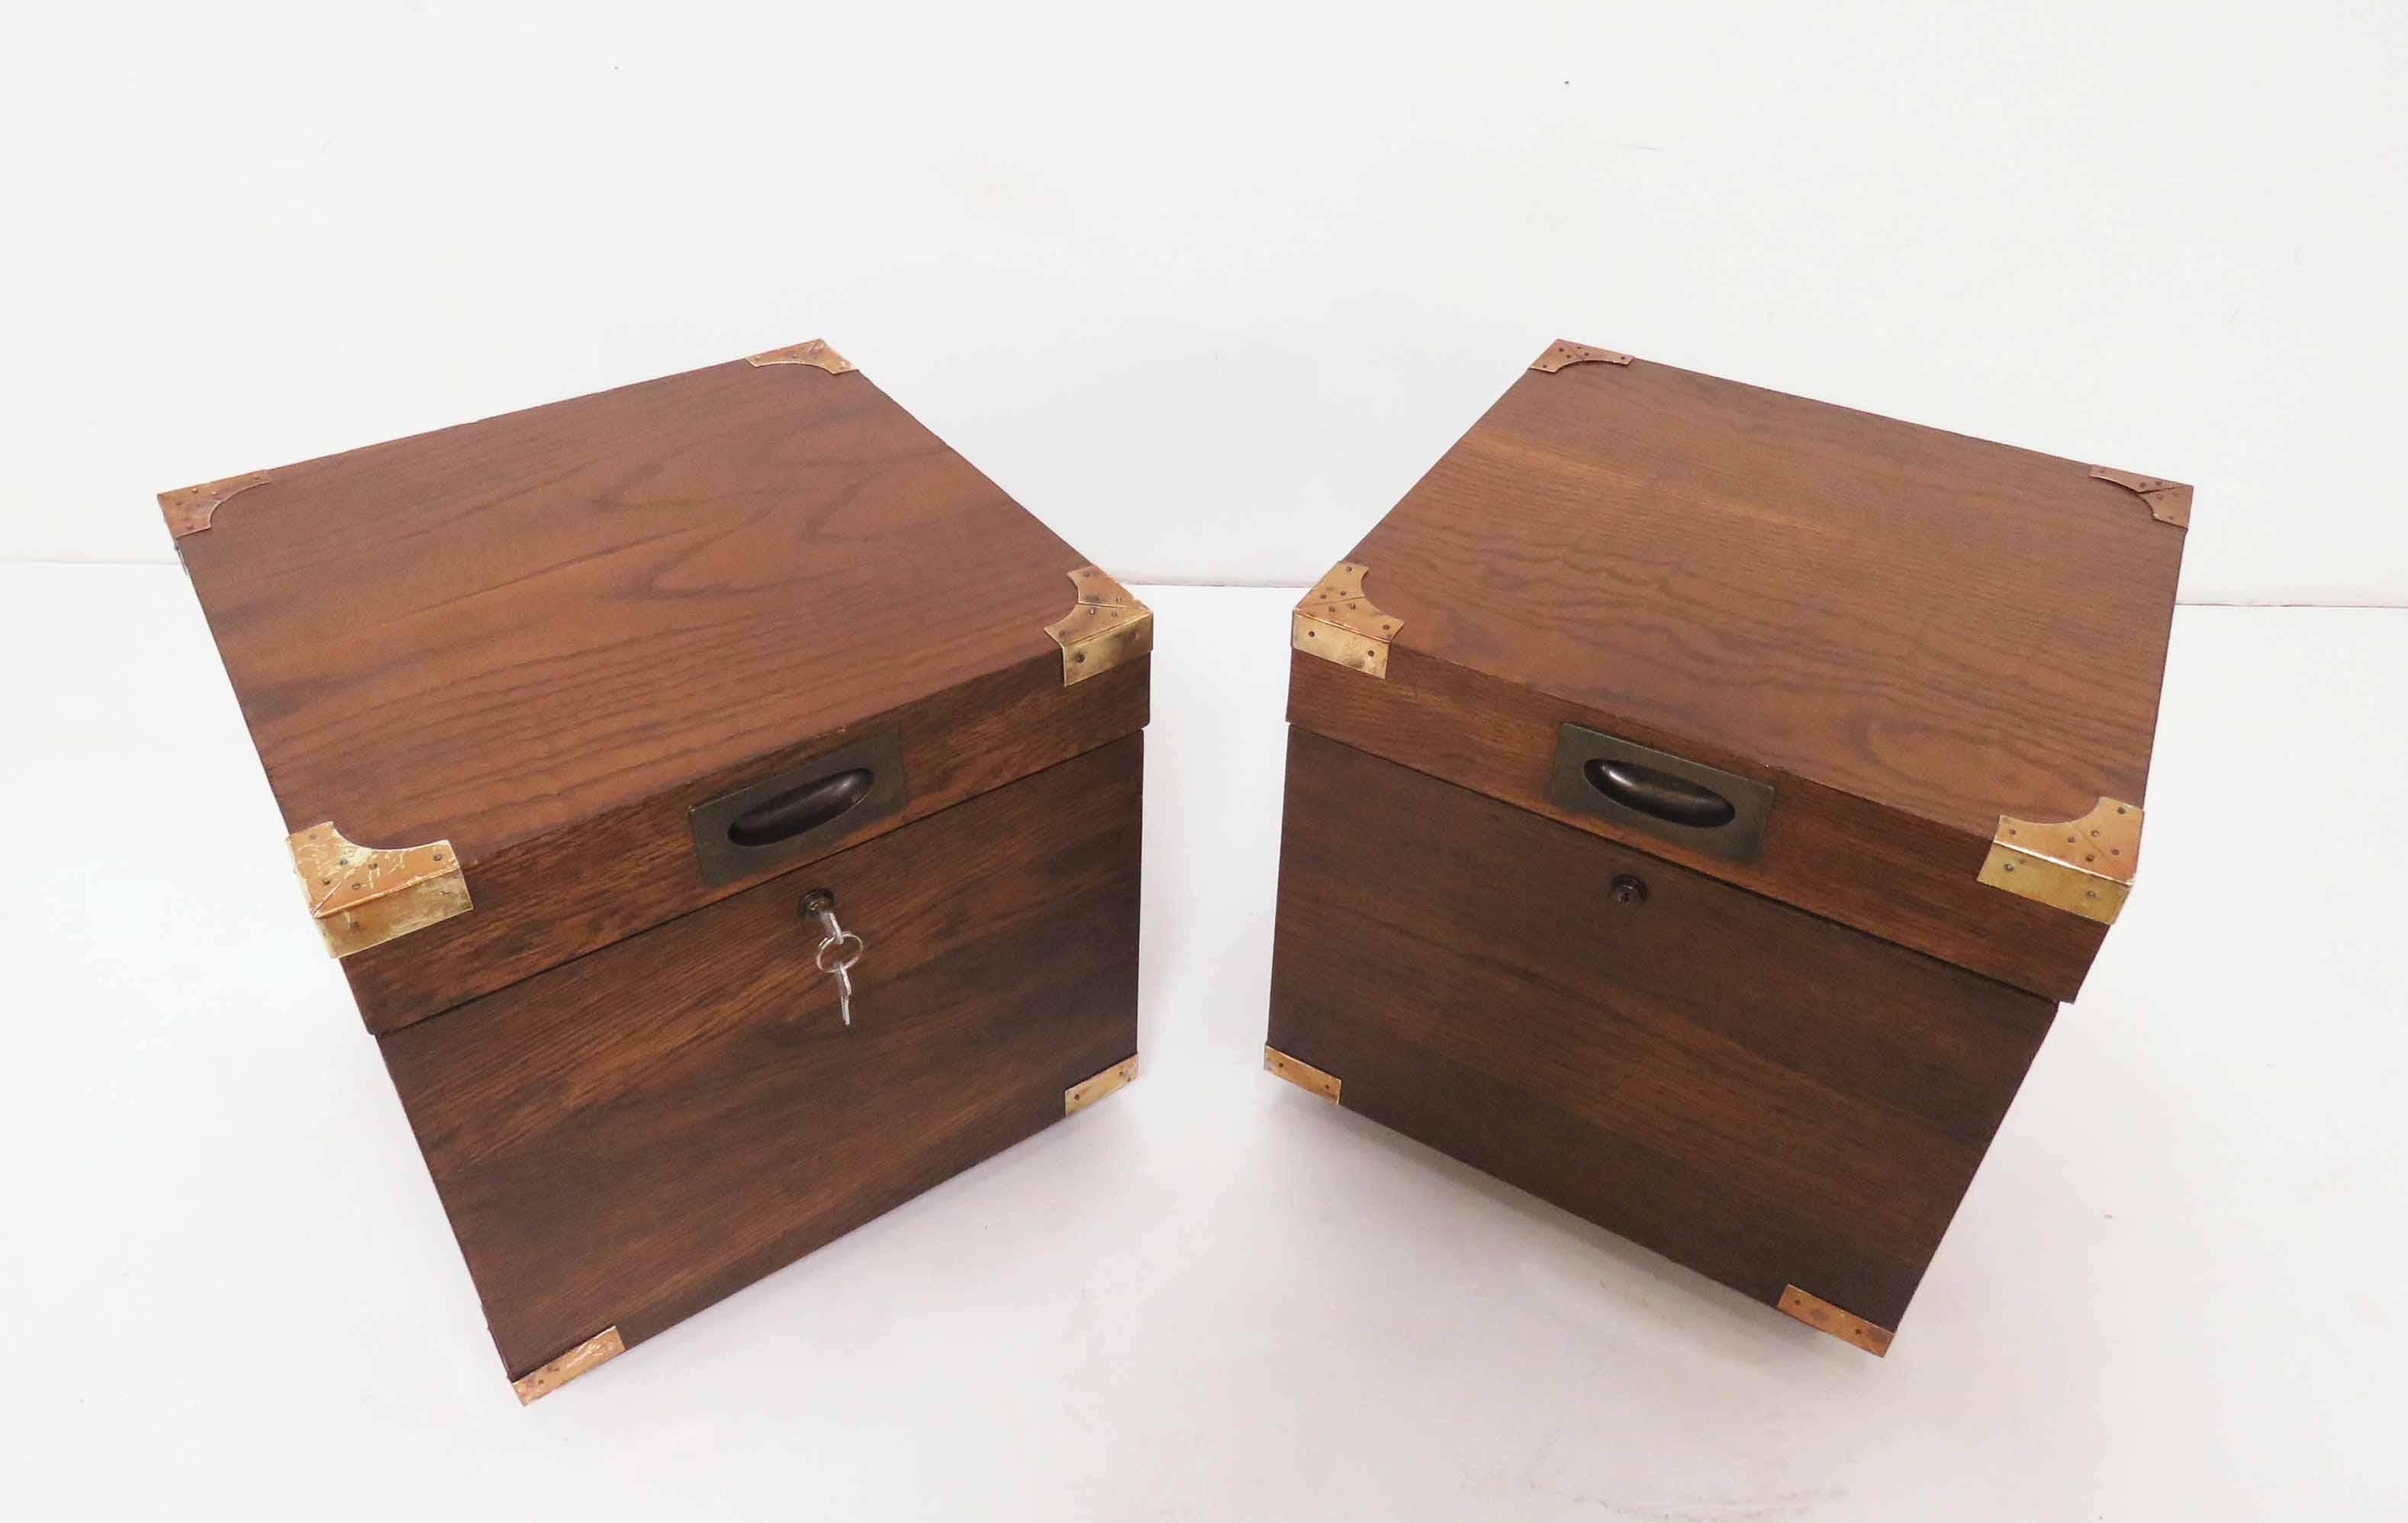 Pair of Campaign style cube form chests, circa 1960s, by Lane Furniture. Perfect size to use as end tables, or side-by-side as a coffee table.